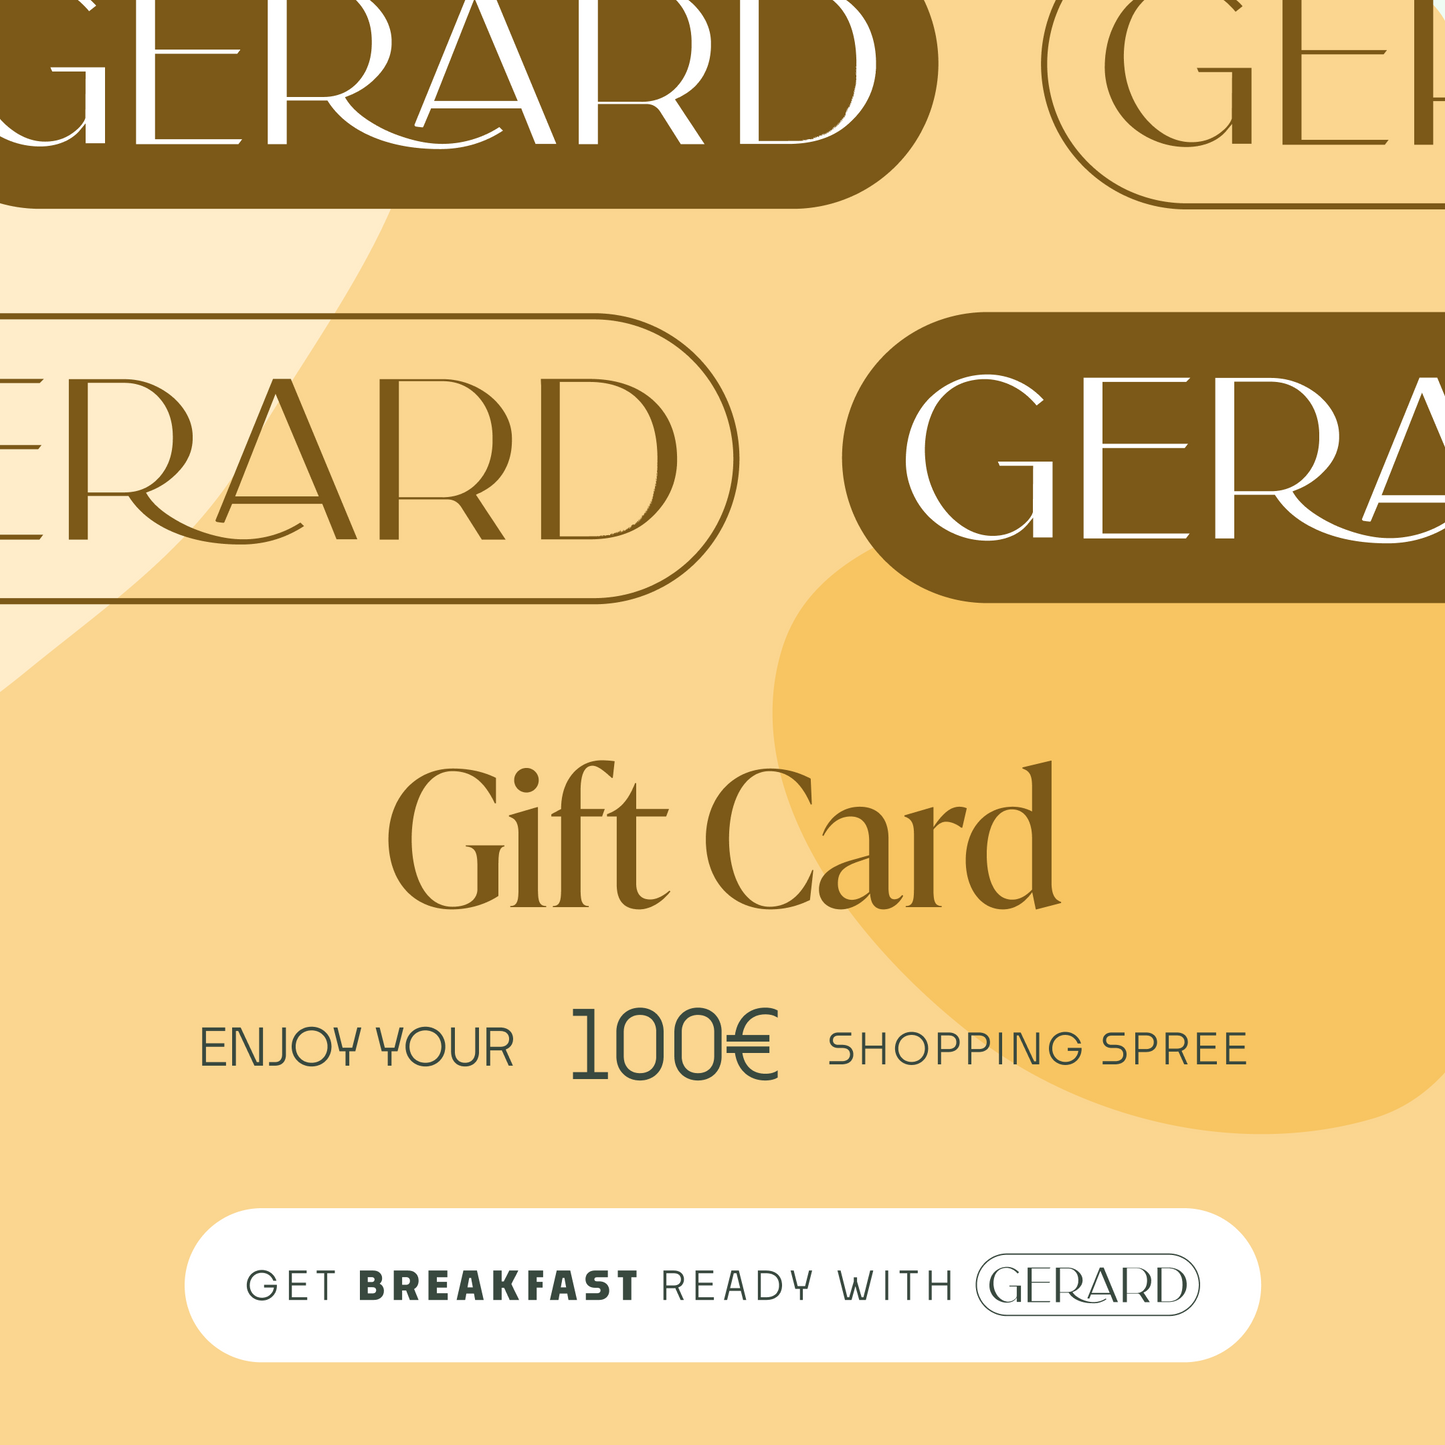 Gérard Bakery gift card of 100 euros you can use to get breakfast ready